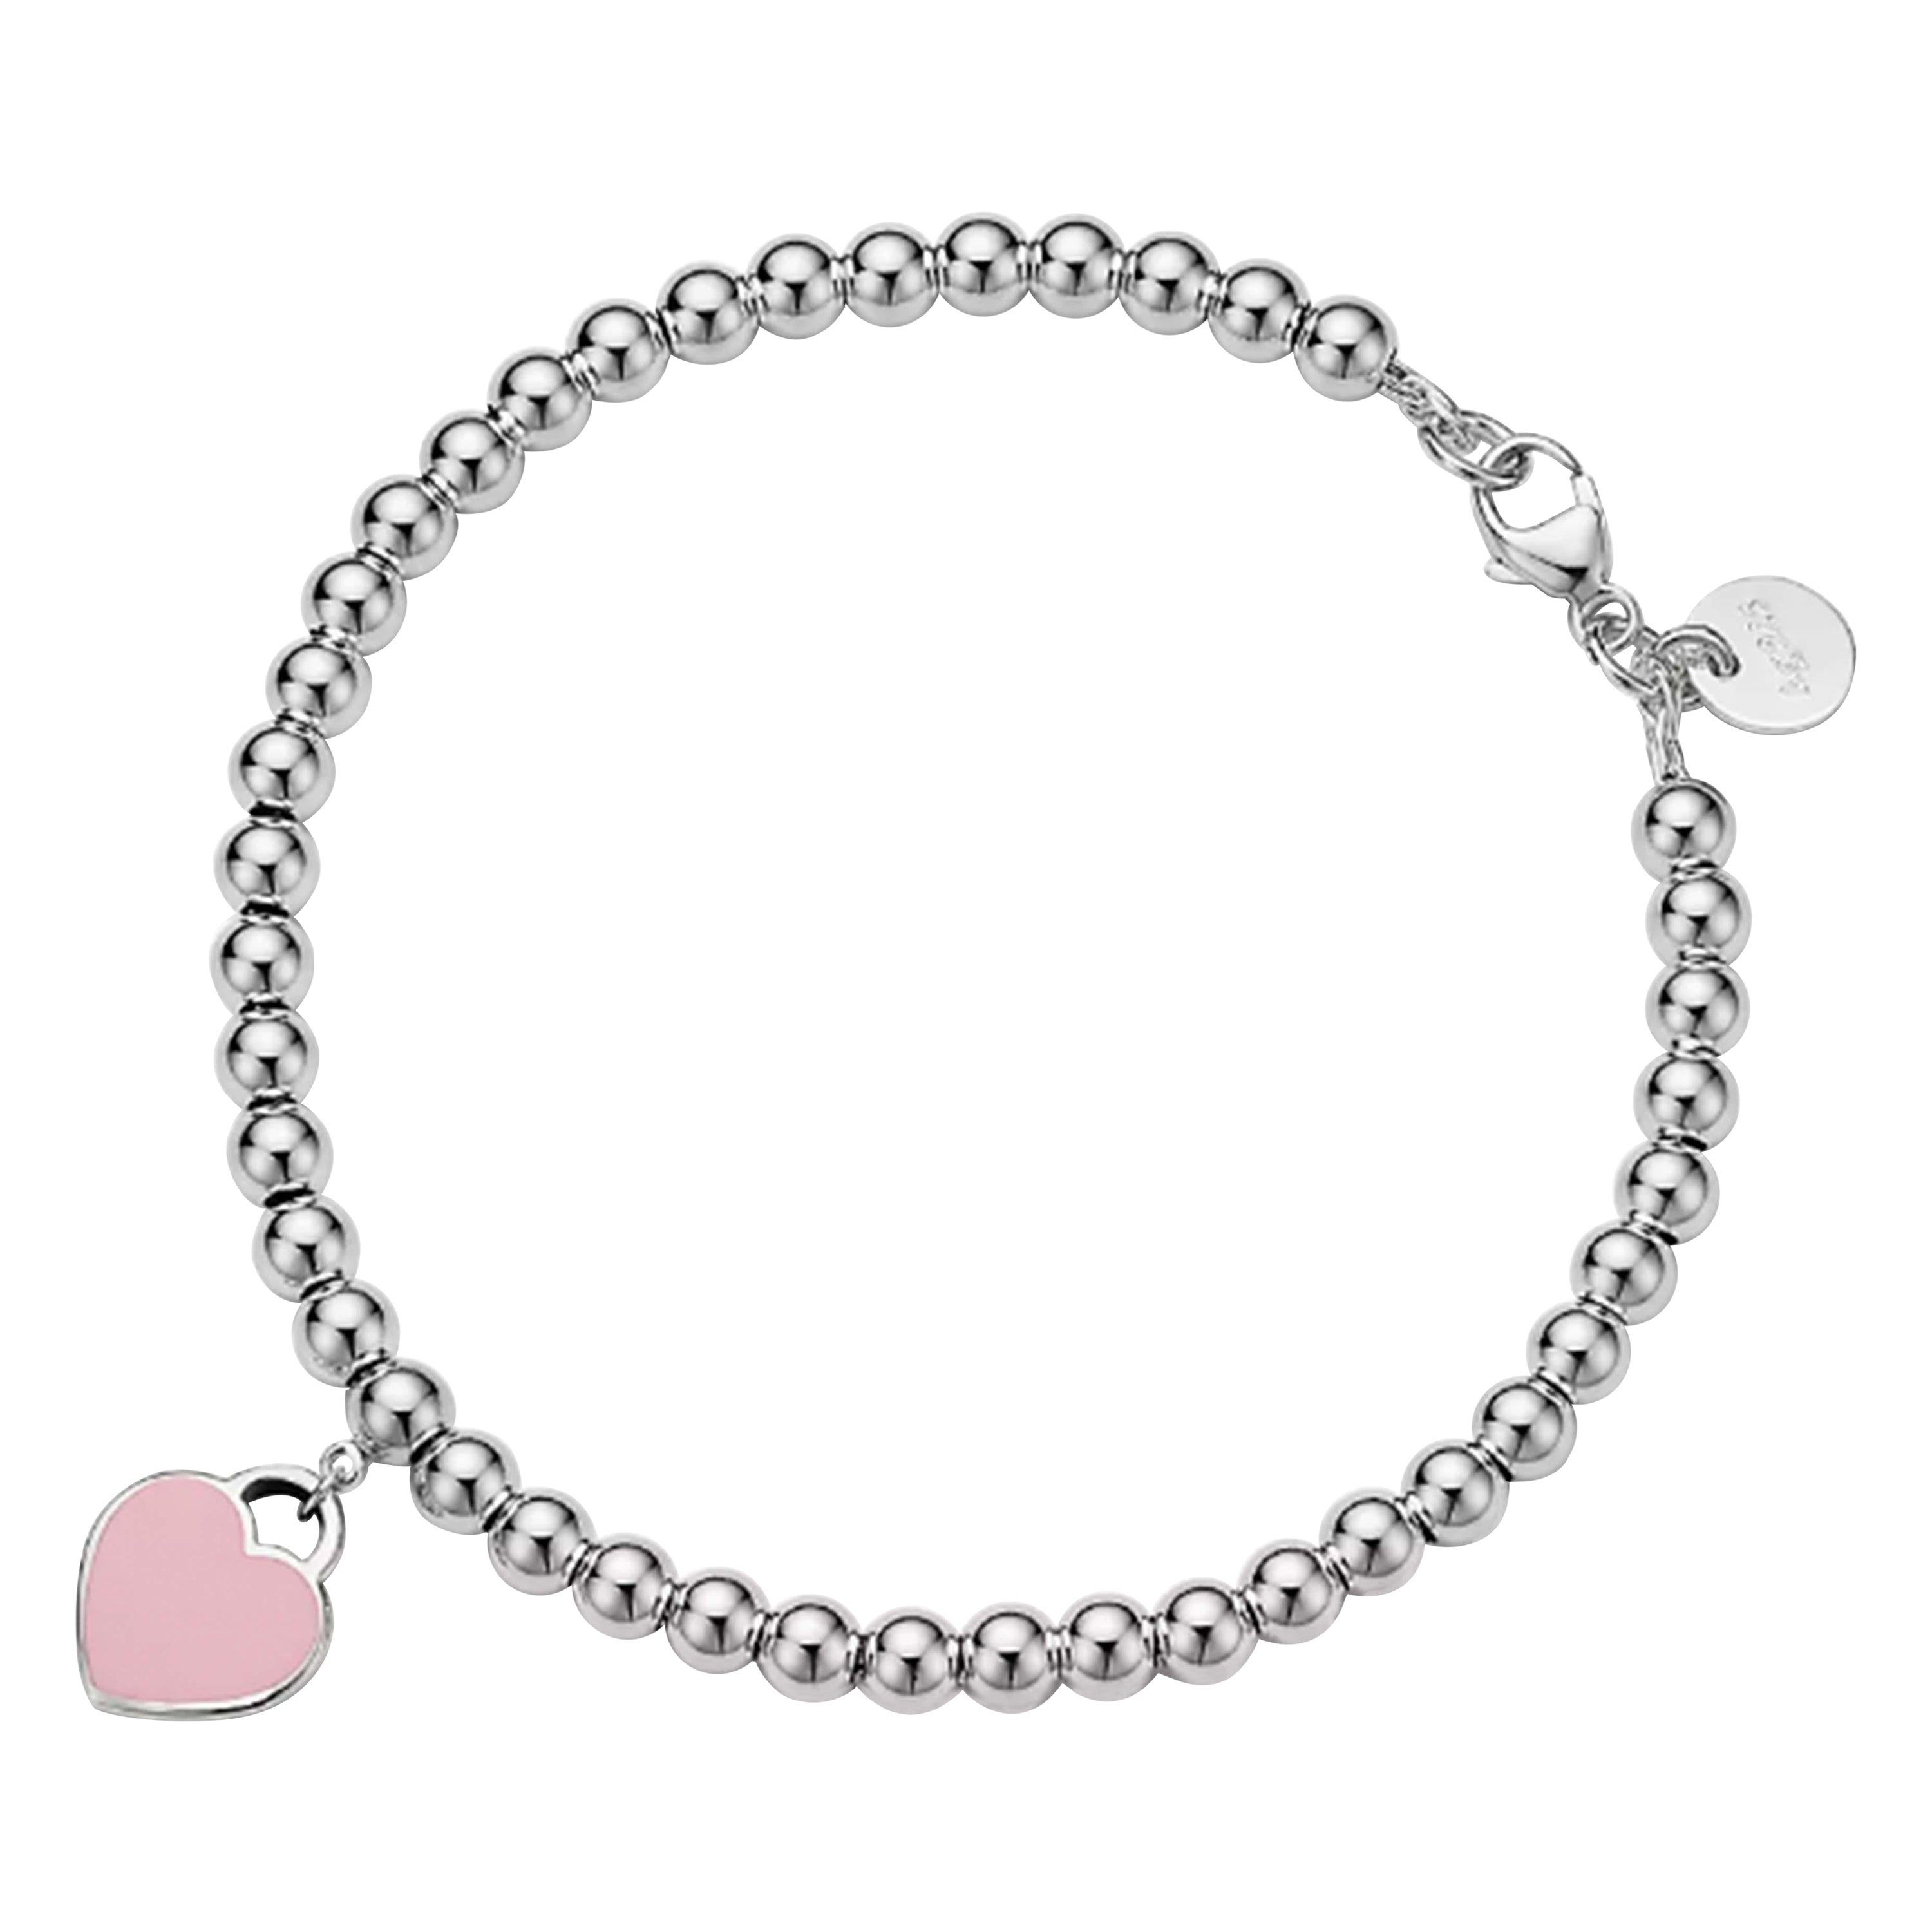 Tiffany and Co. Pink Heart Tag Bead Bracelet Sterling Silver